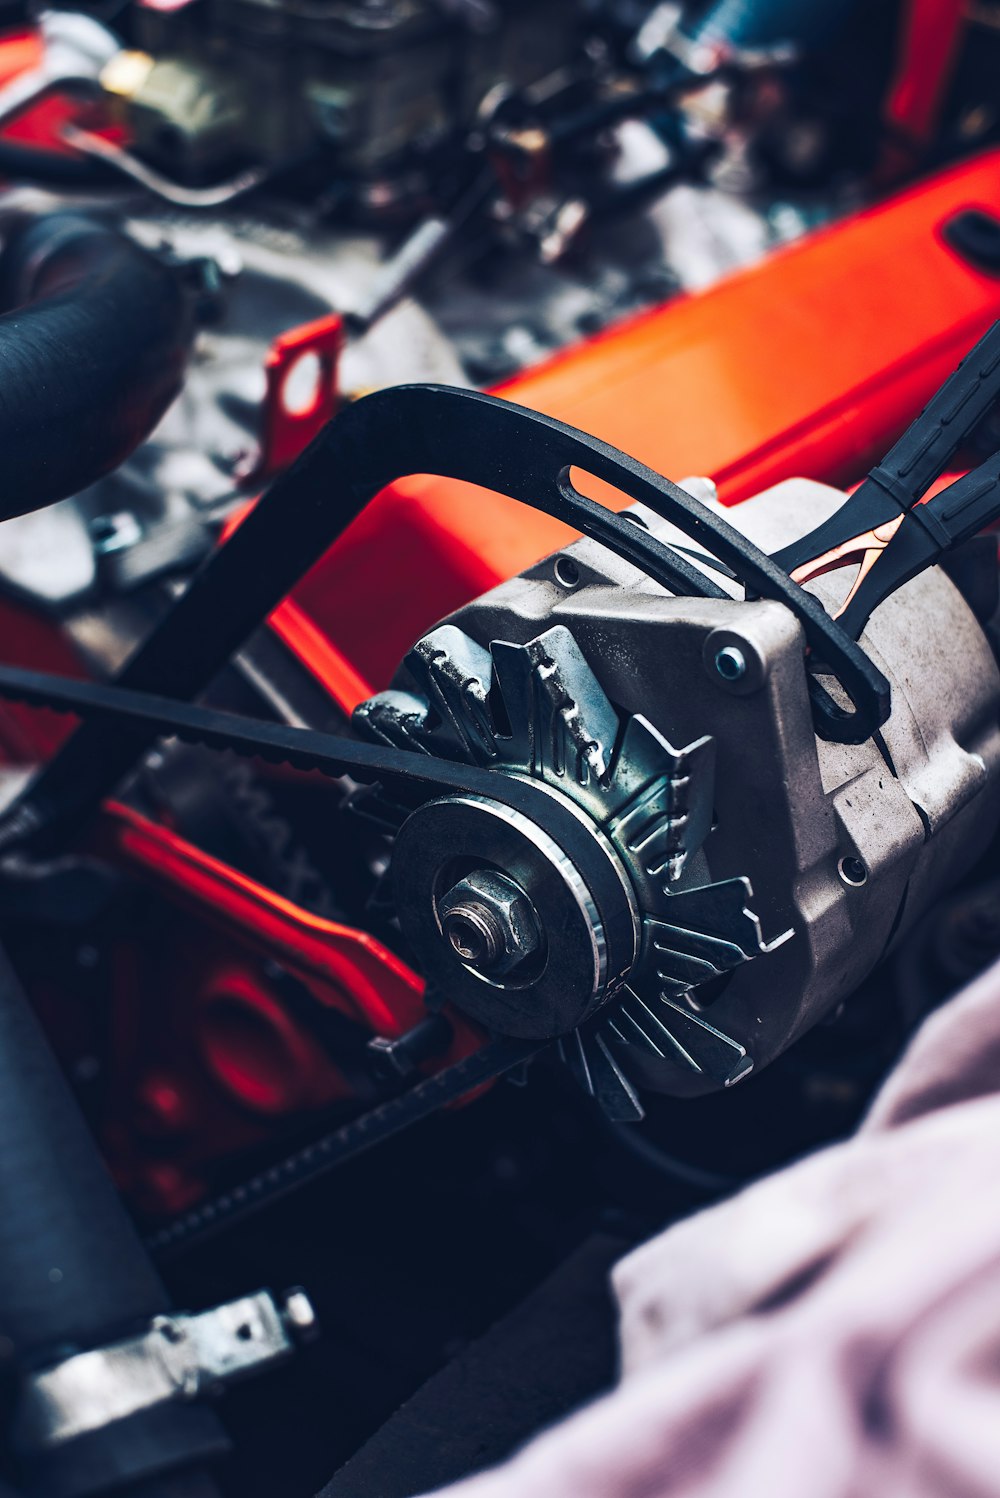 a close up of a motorcycle engine and gear